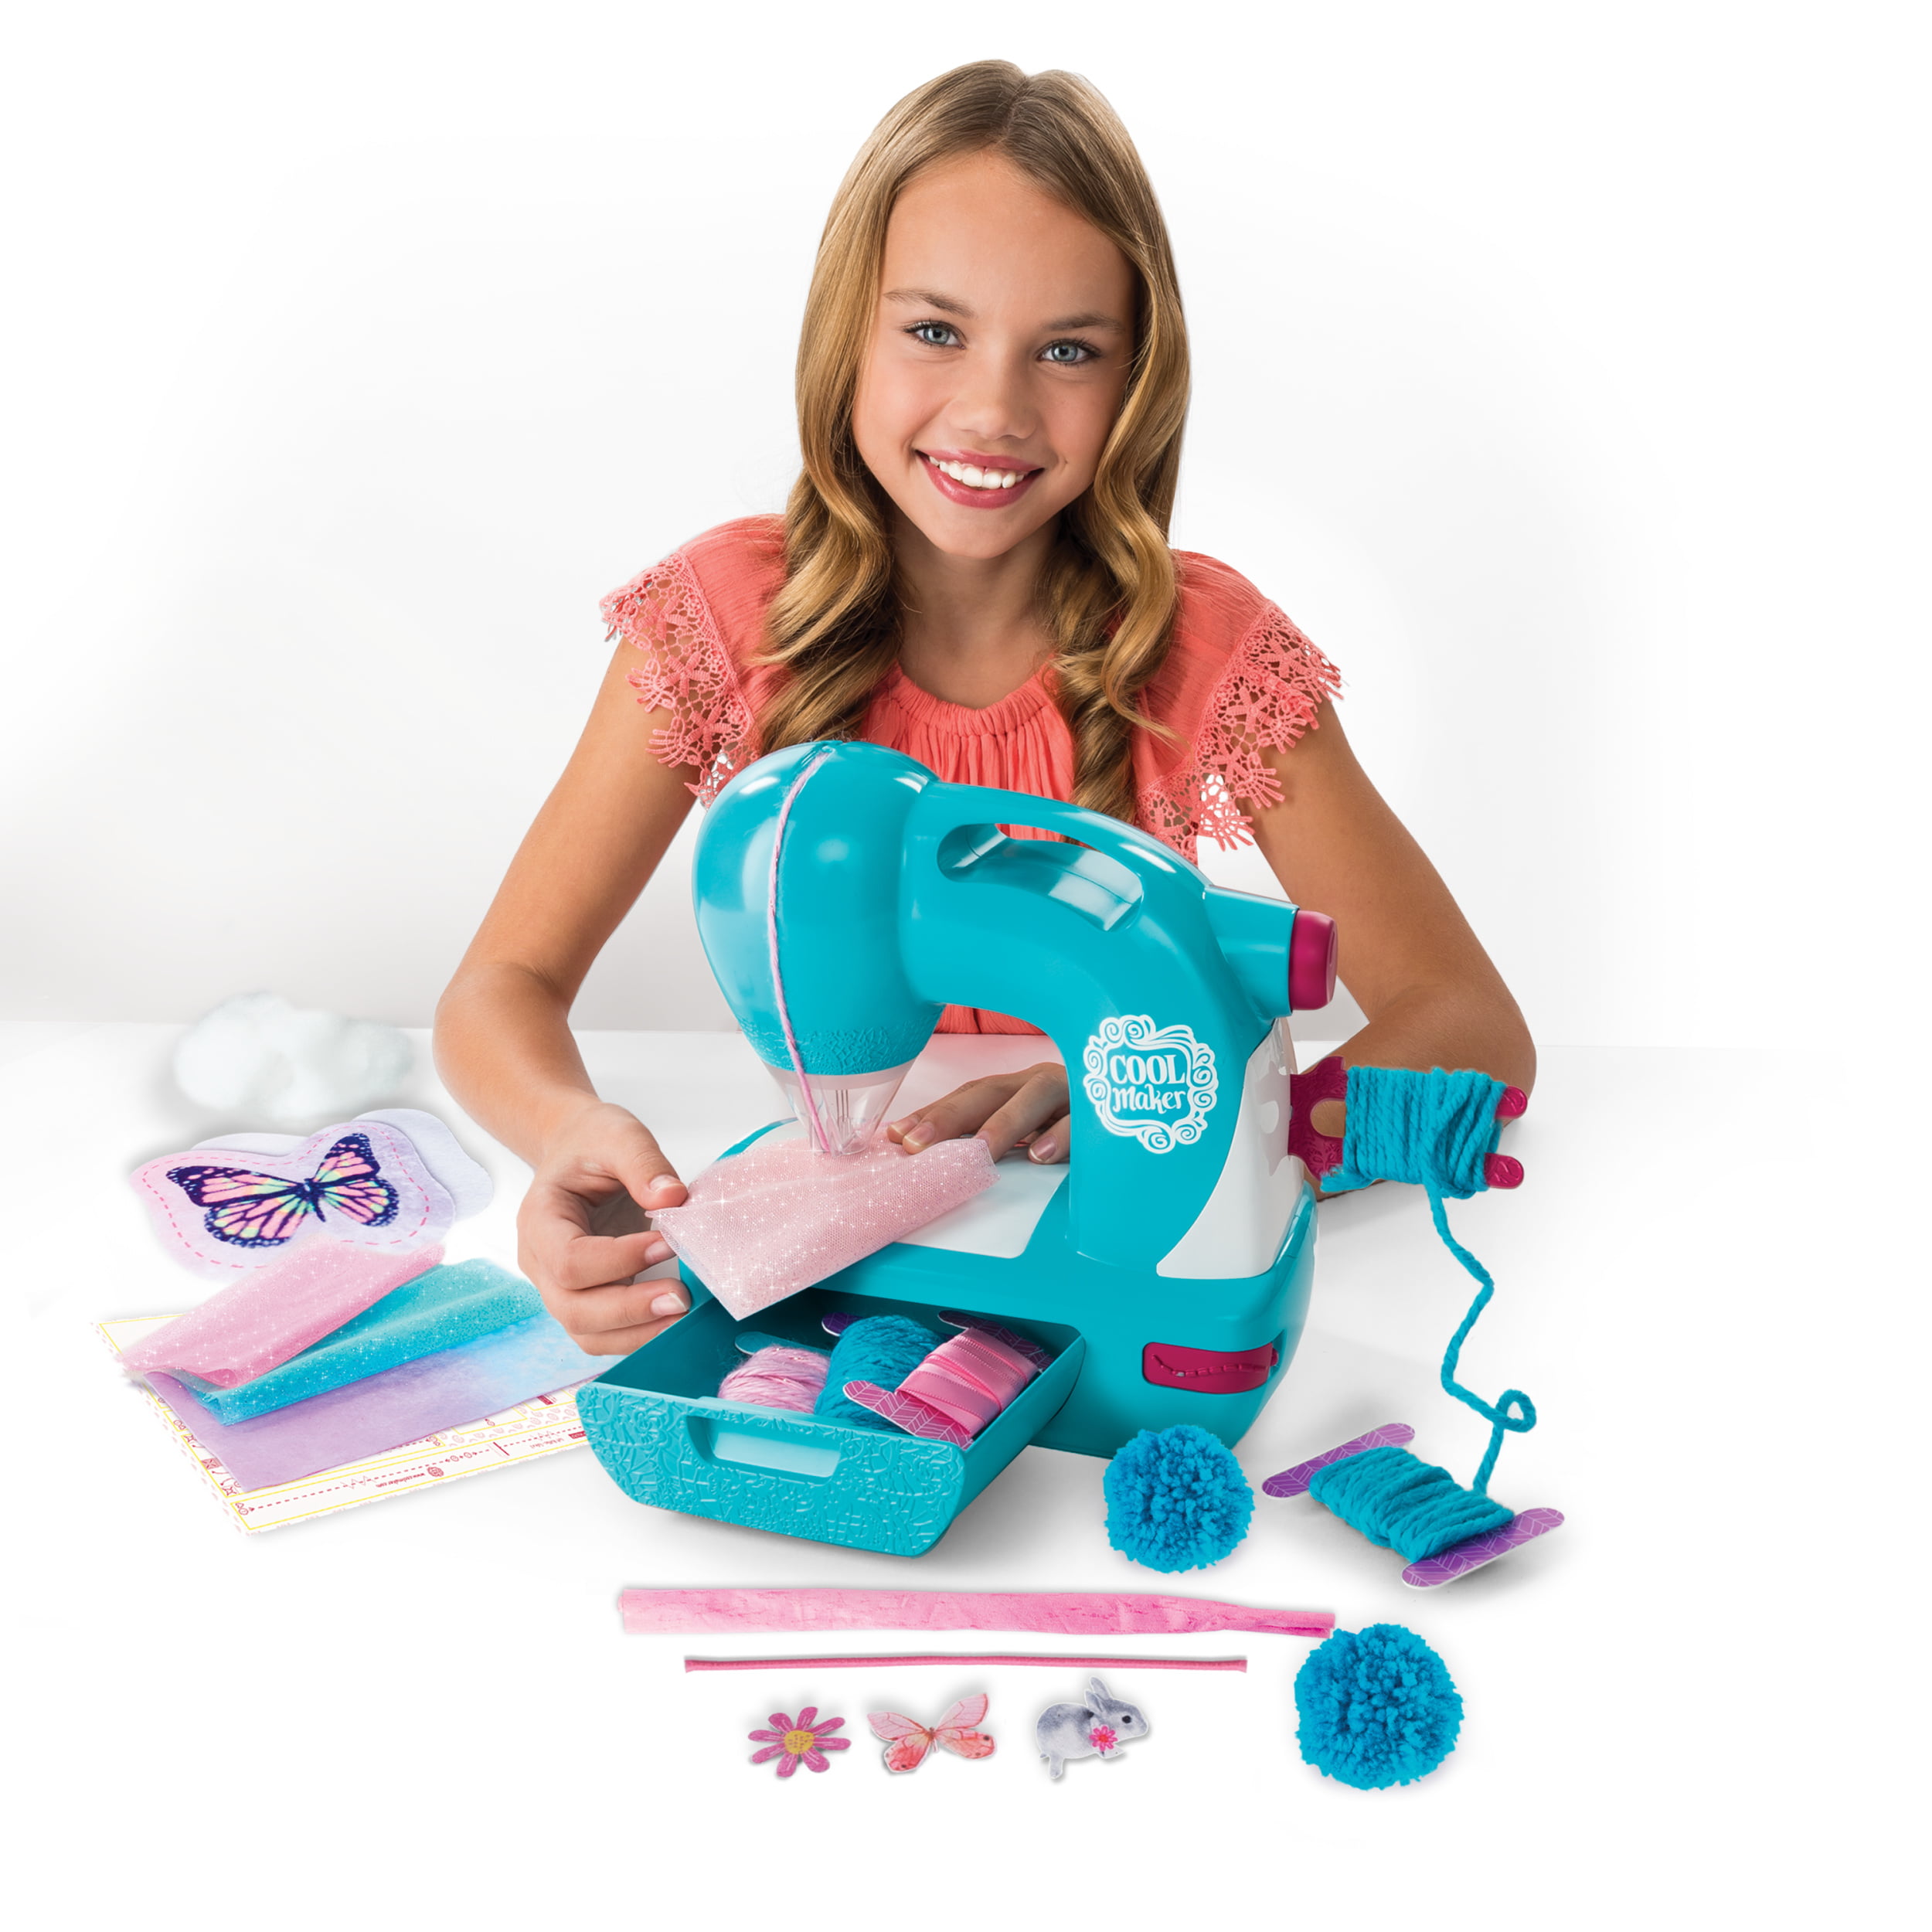 Cool Maker, Sew Cool Sewing Machine with 5 Trendy Projects and